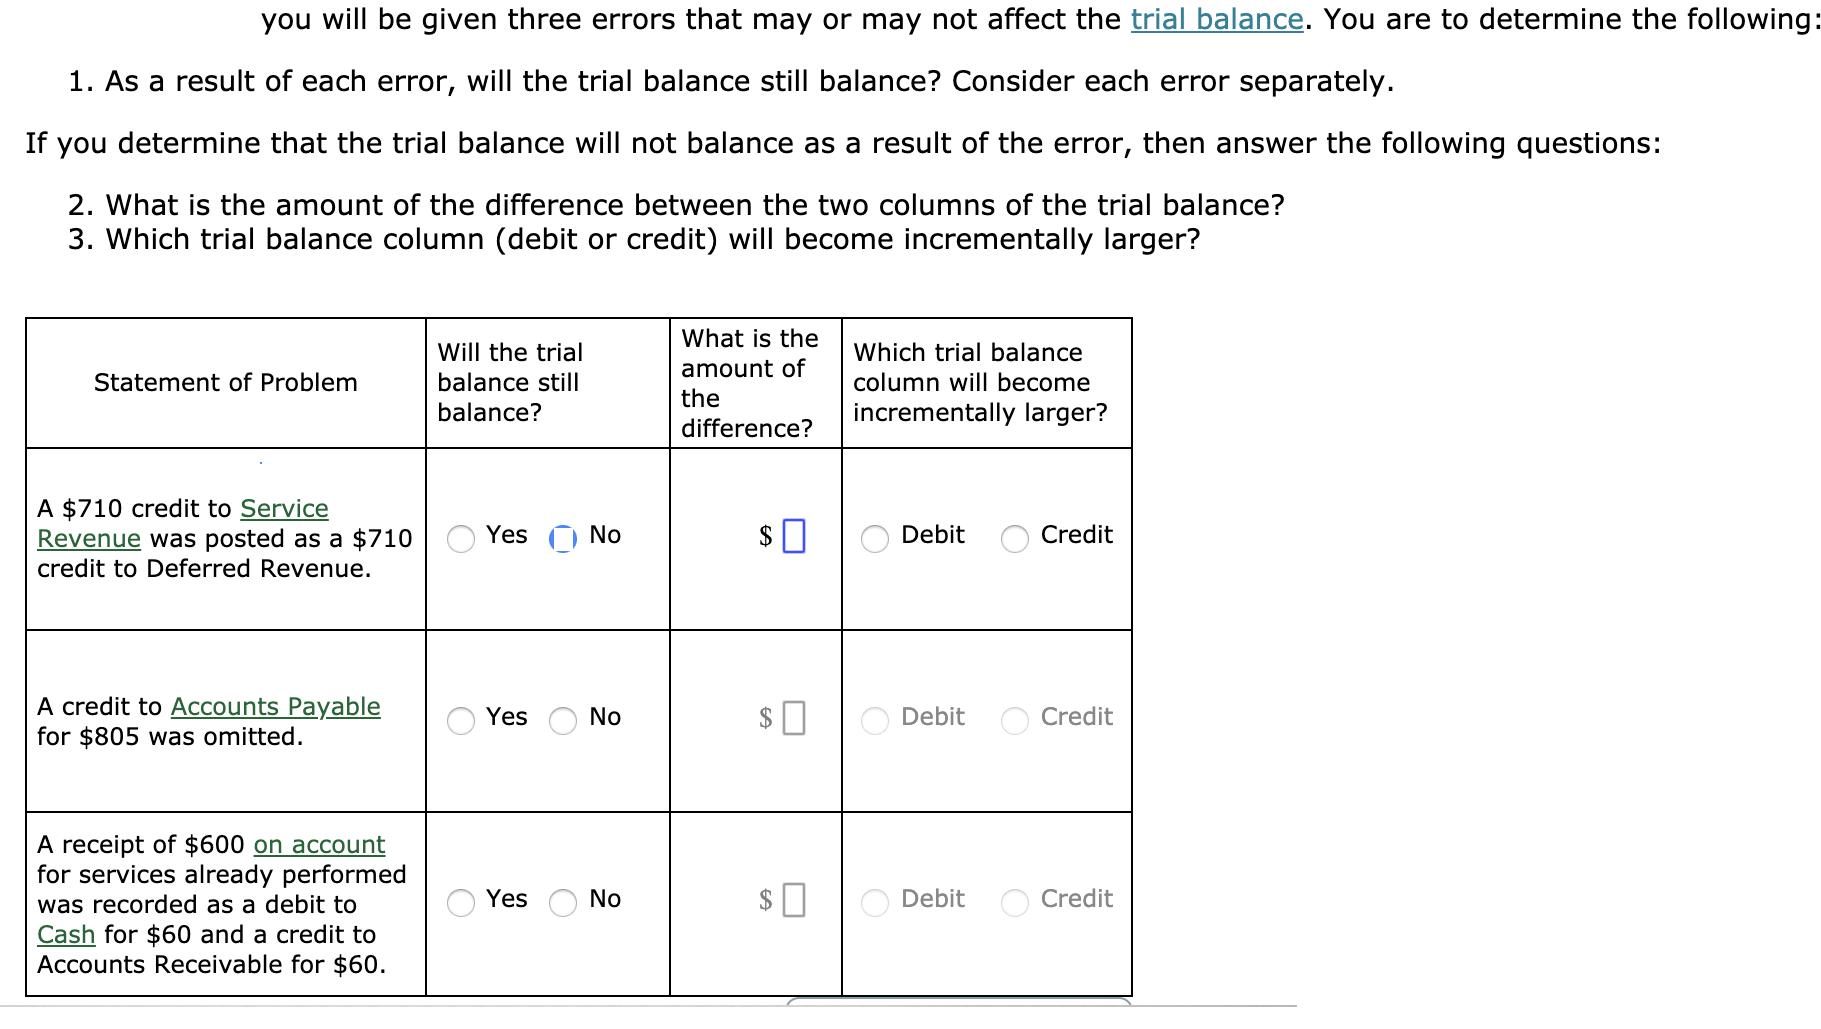 you will be given three errors that may or may not affect the trial balance. You are to determine the